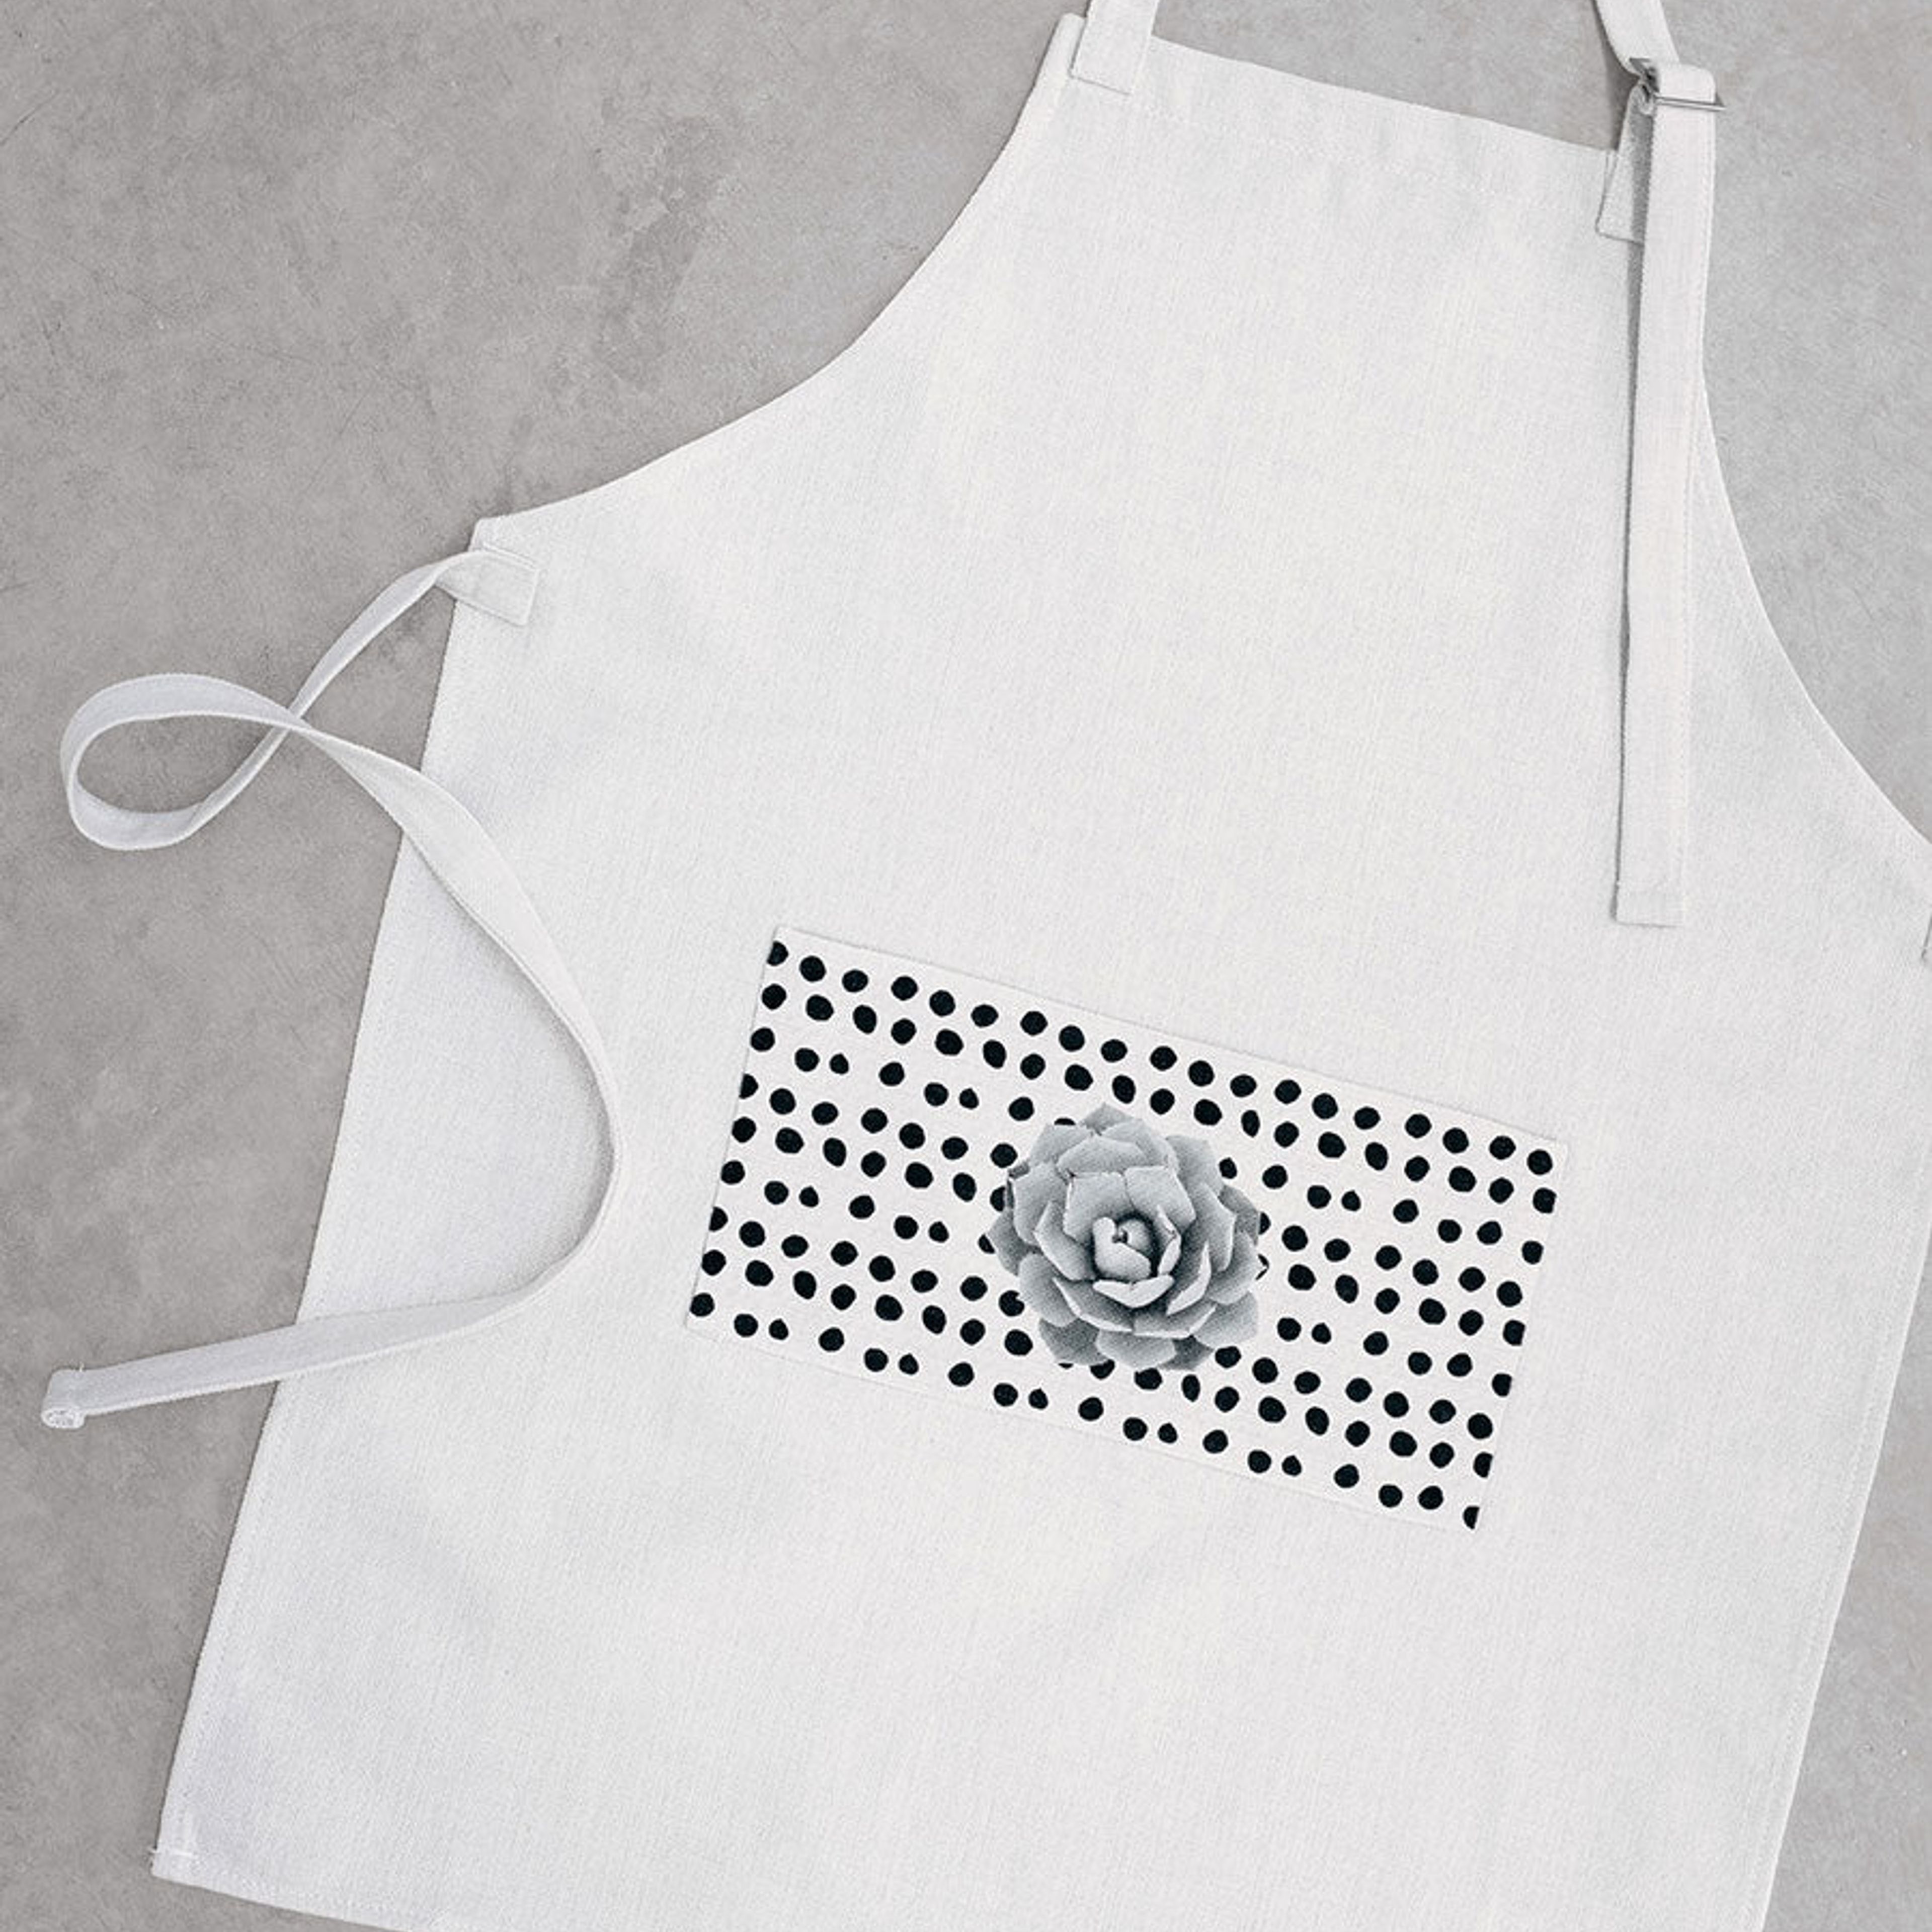 Succulent Polk-A-Dot Apron, College Student Gift, Mother's Day Gift, Easter Gift